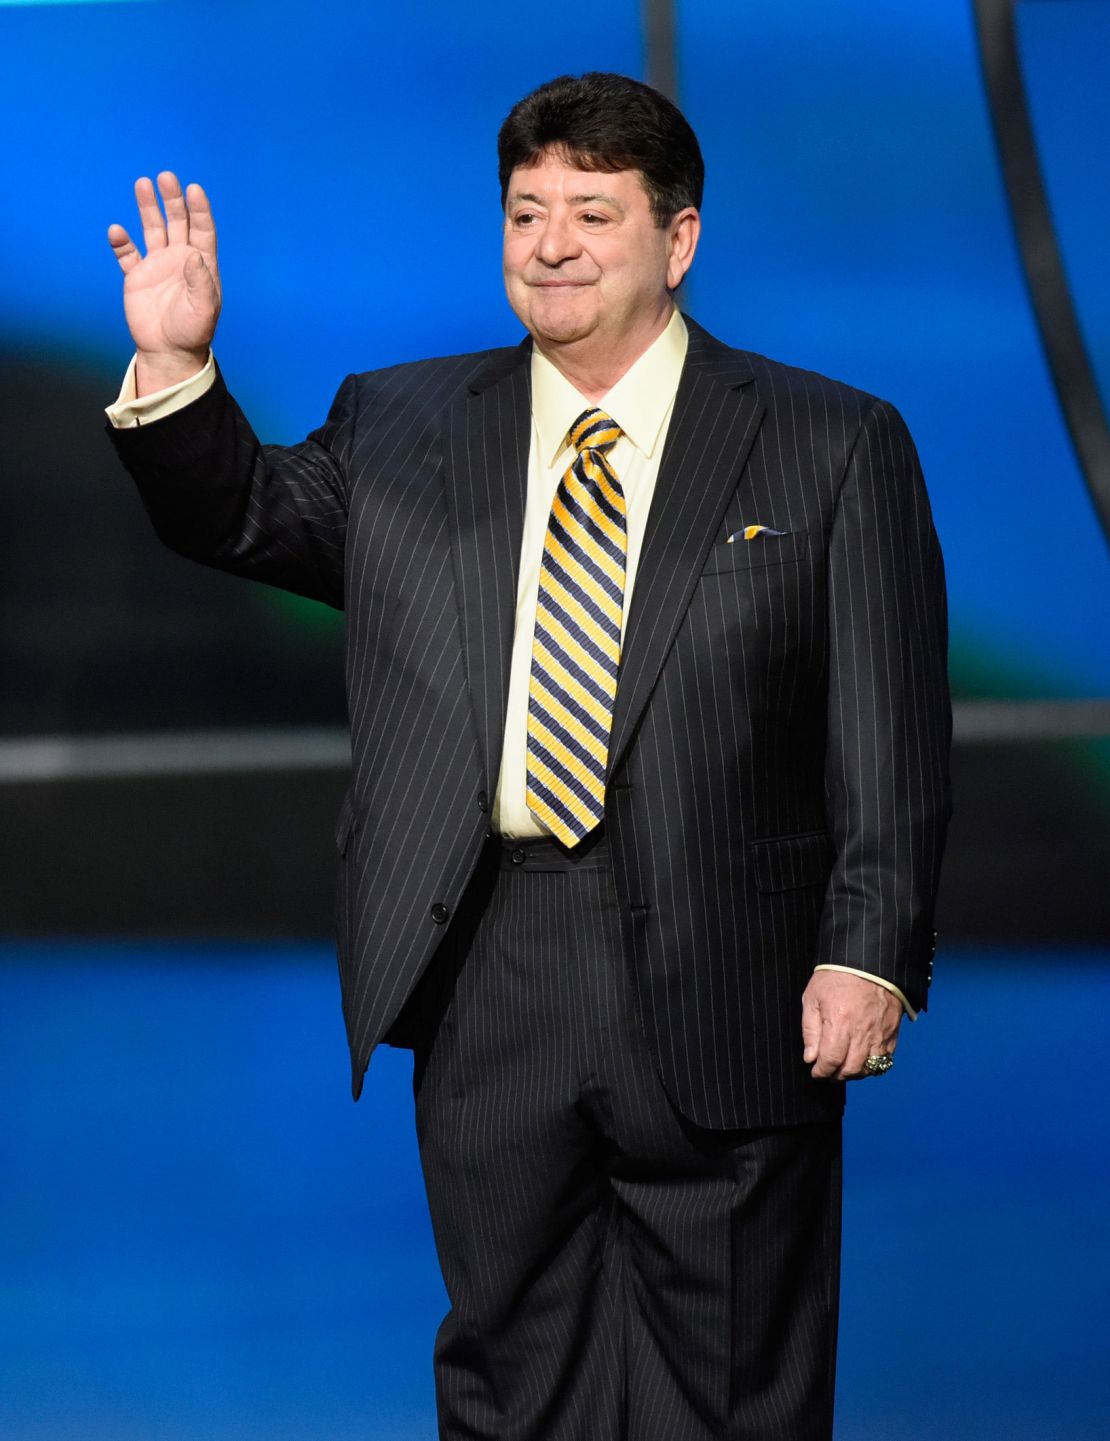 Eddie DeBartolo Jr. speaks onstage during the 5th Annual NFL Honors in February 2016 in San Francisco.